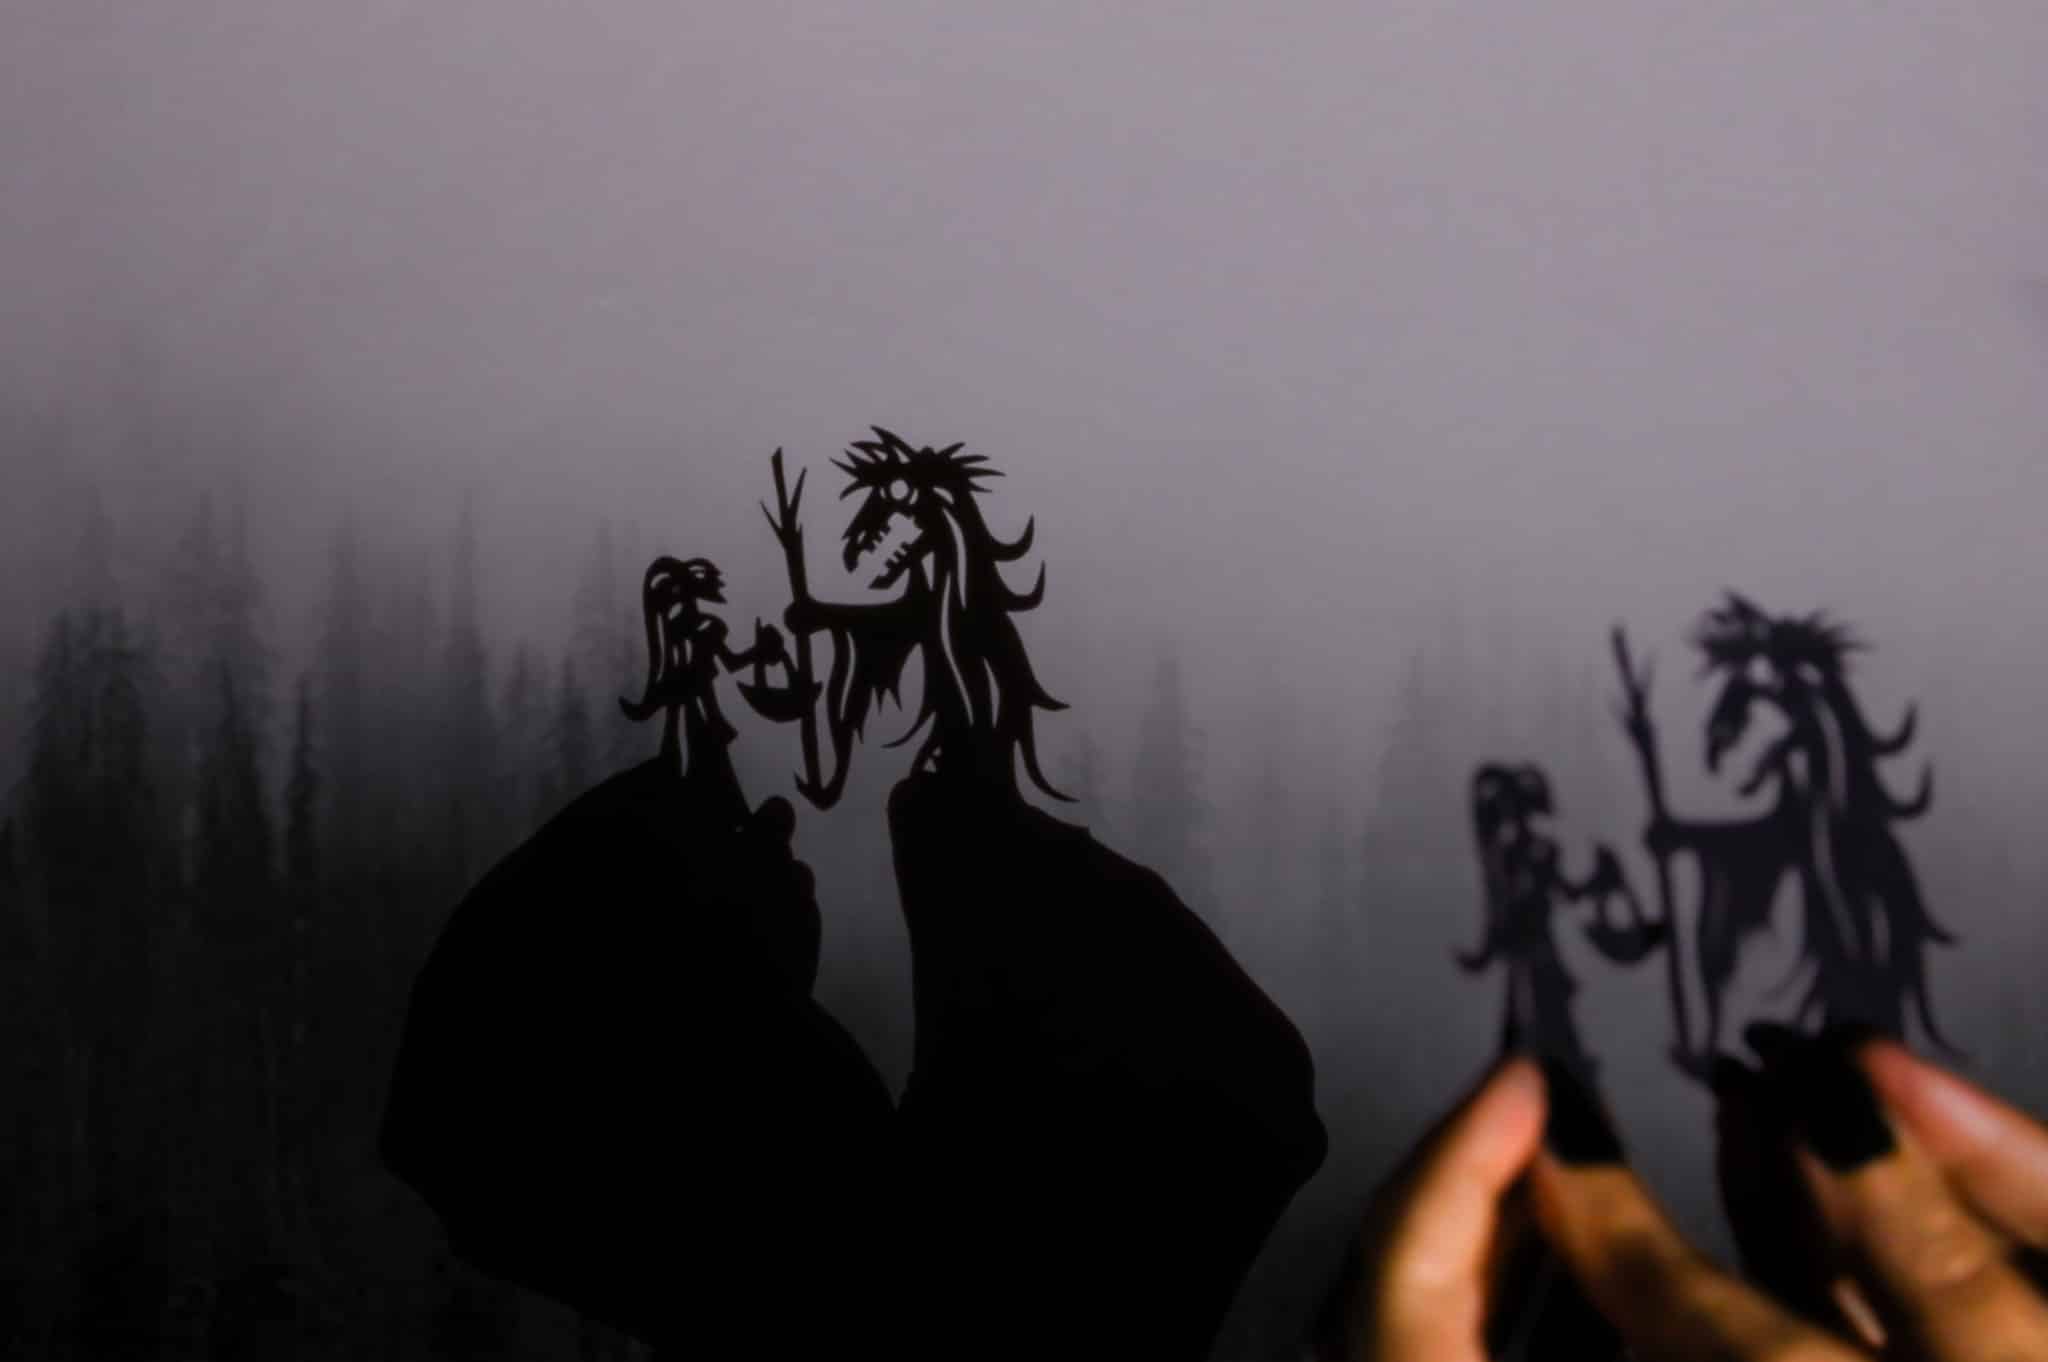 Tania Yager holding two small cut-paper shadow puppets which cast shadows onto a misty forest scene.